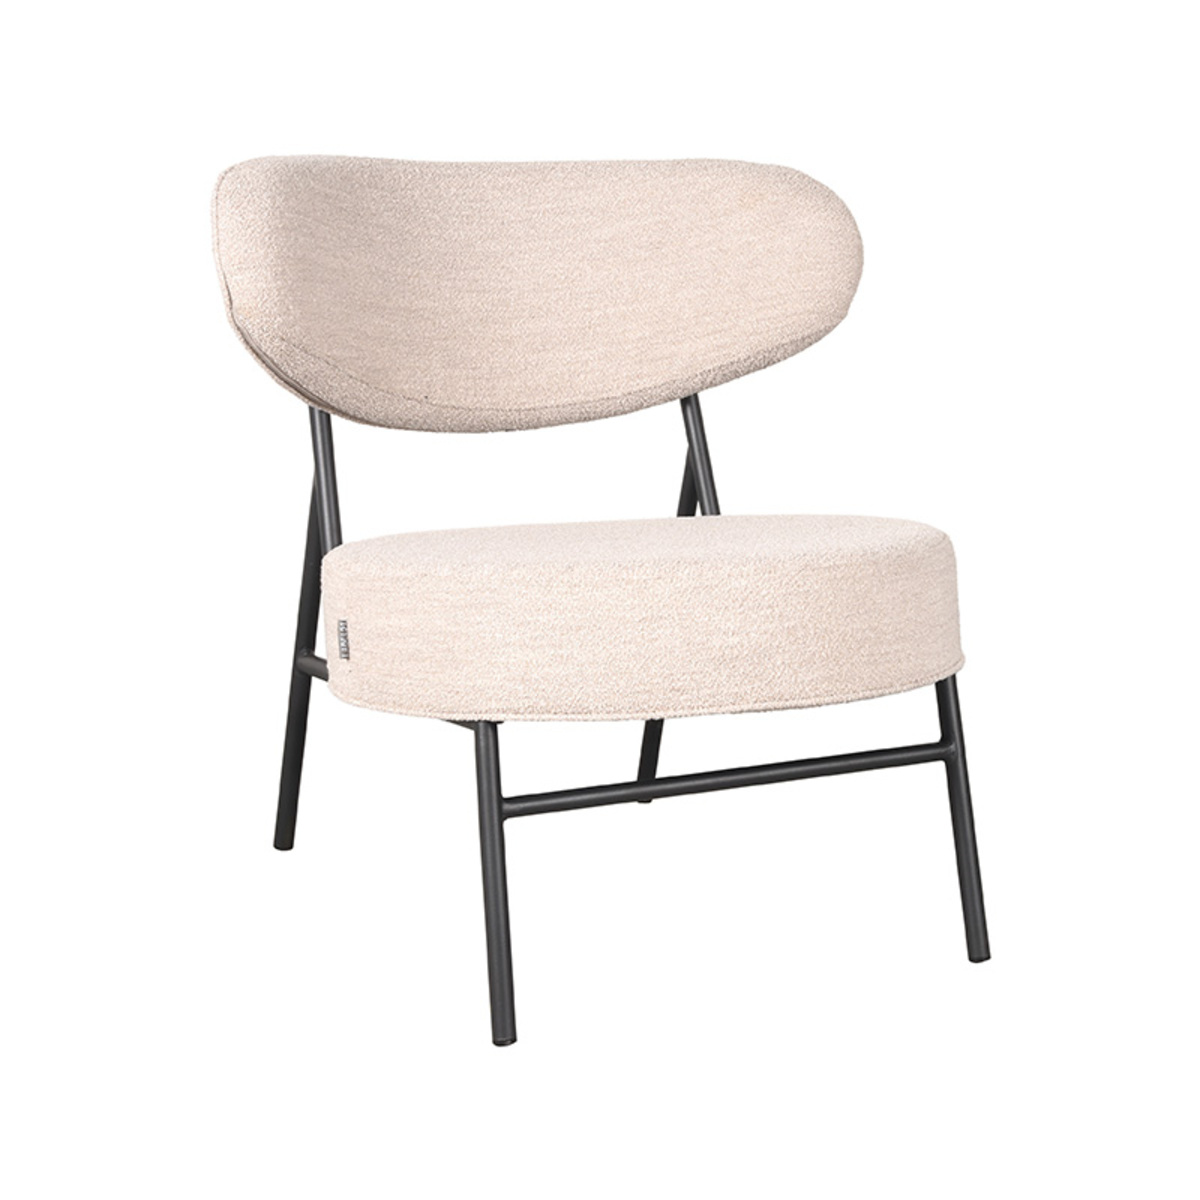 https://www.label51.nl/media/catalog/product/F/a/Fauteuil_Zack_Naturel_Boucle_85x79x82_Cm_Perspectief.jpg